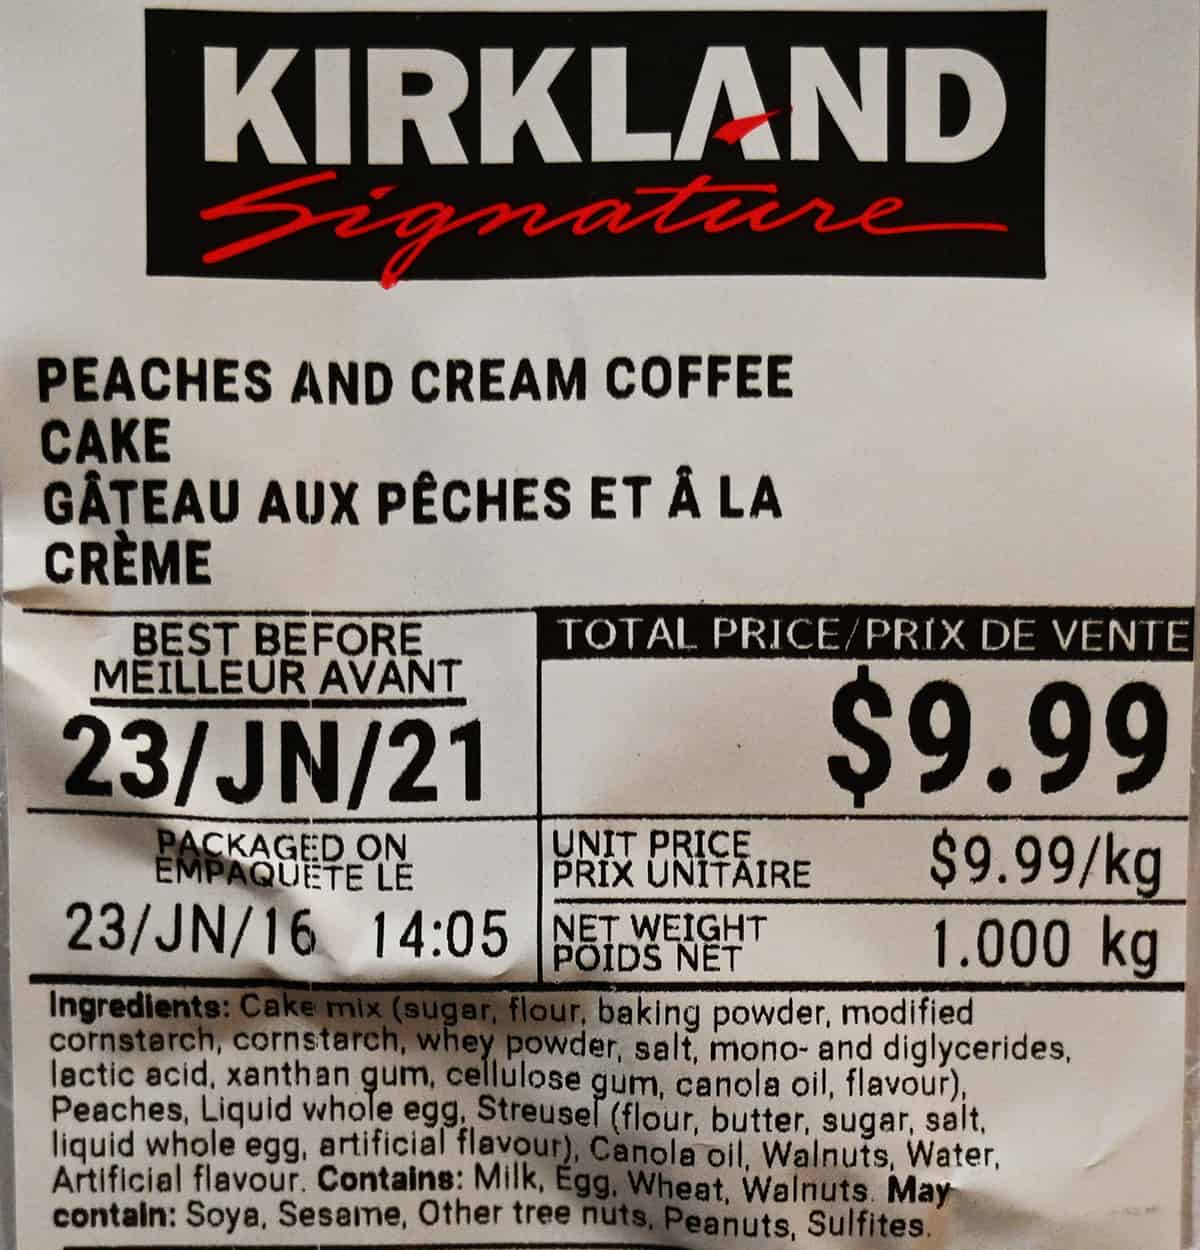 Closeup image of the front label from the peaches and cream coffee cake showing the best before date and cost.